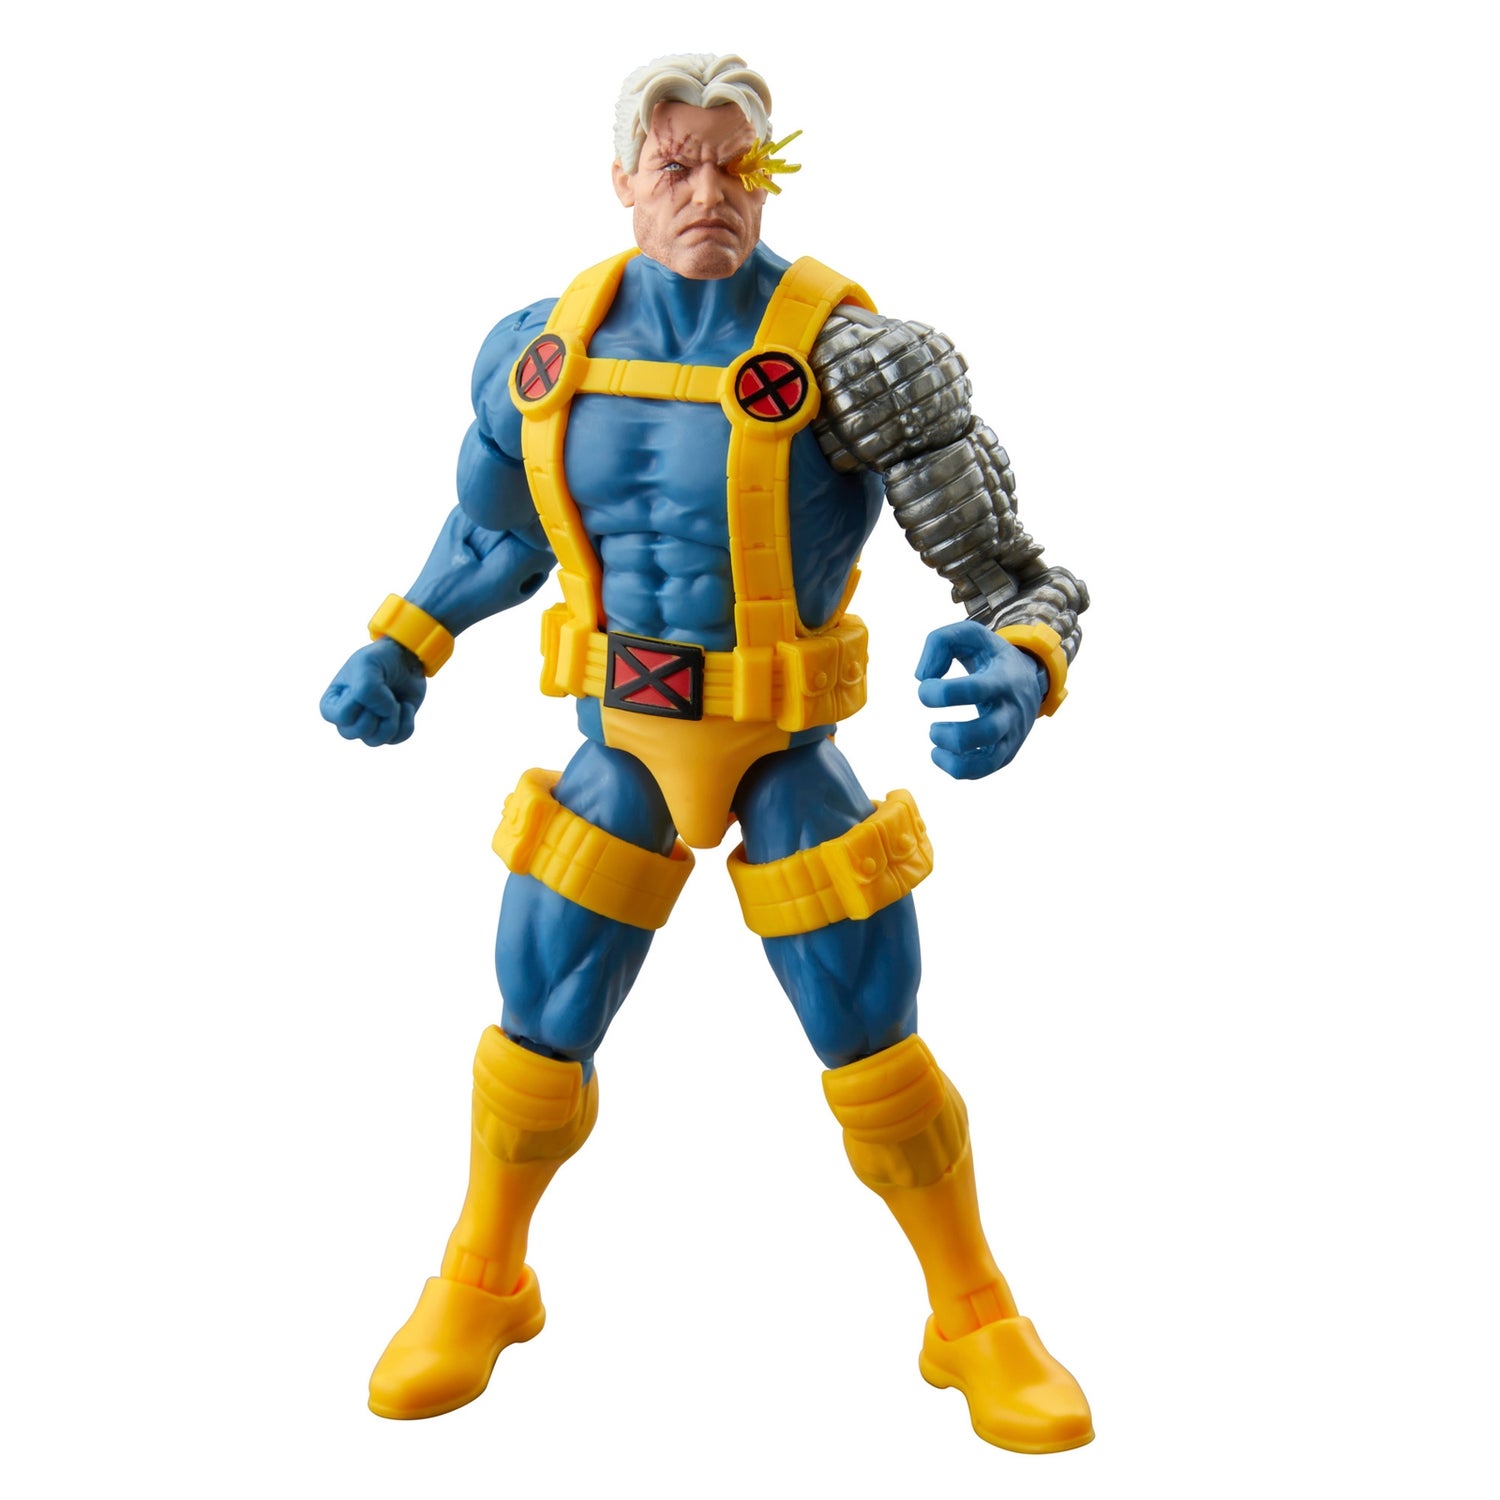 Hasbro Marvel Legends Series Marvel's Cable, 6" Comics Collectible Action Figure